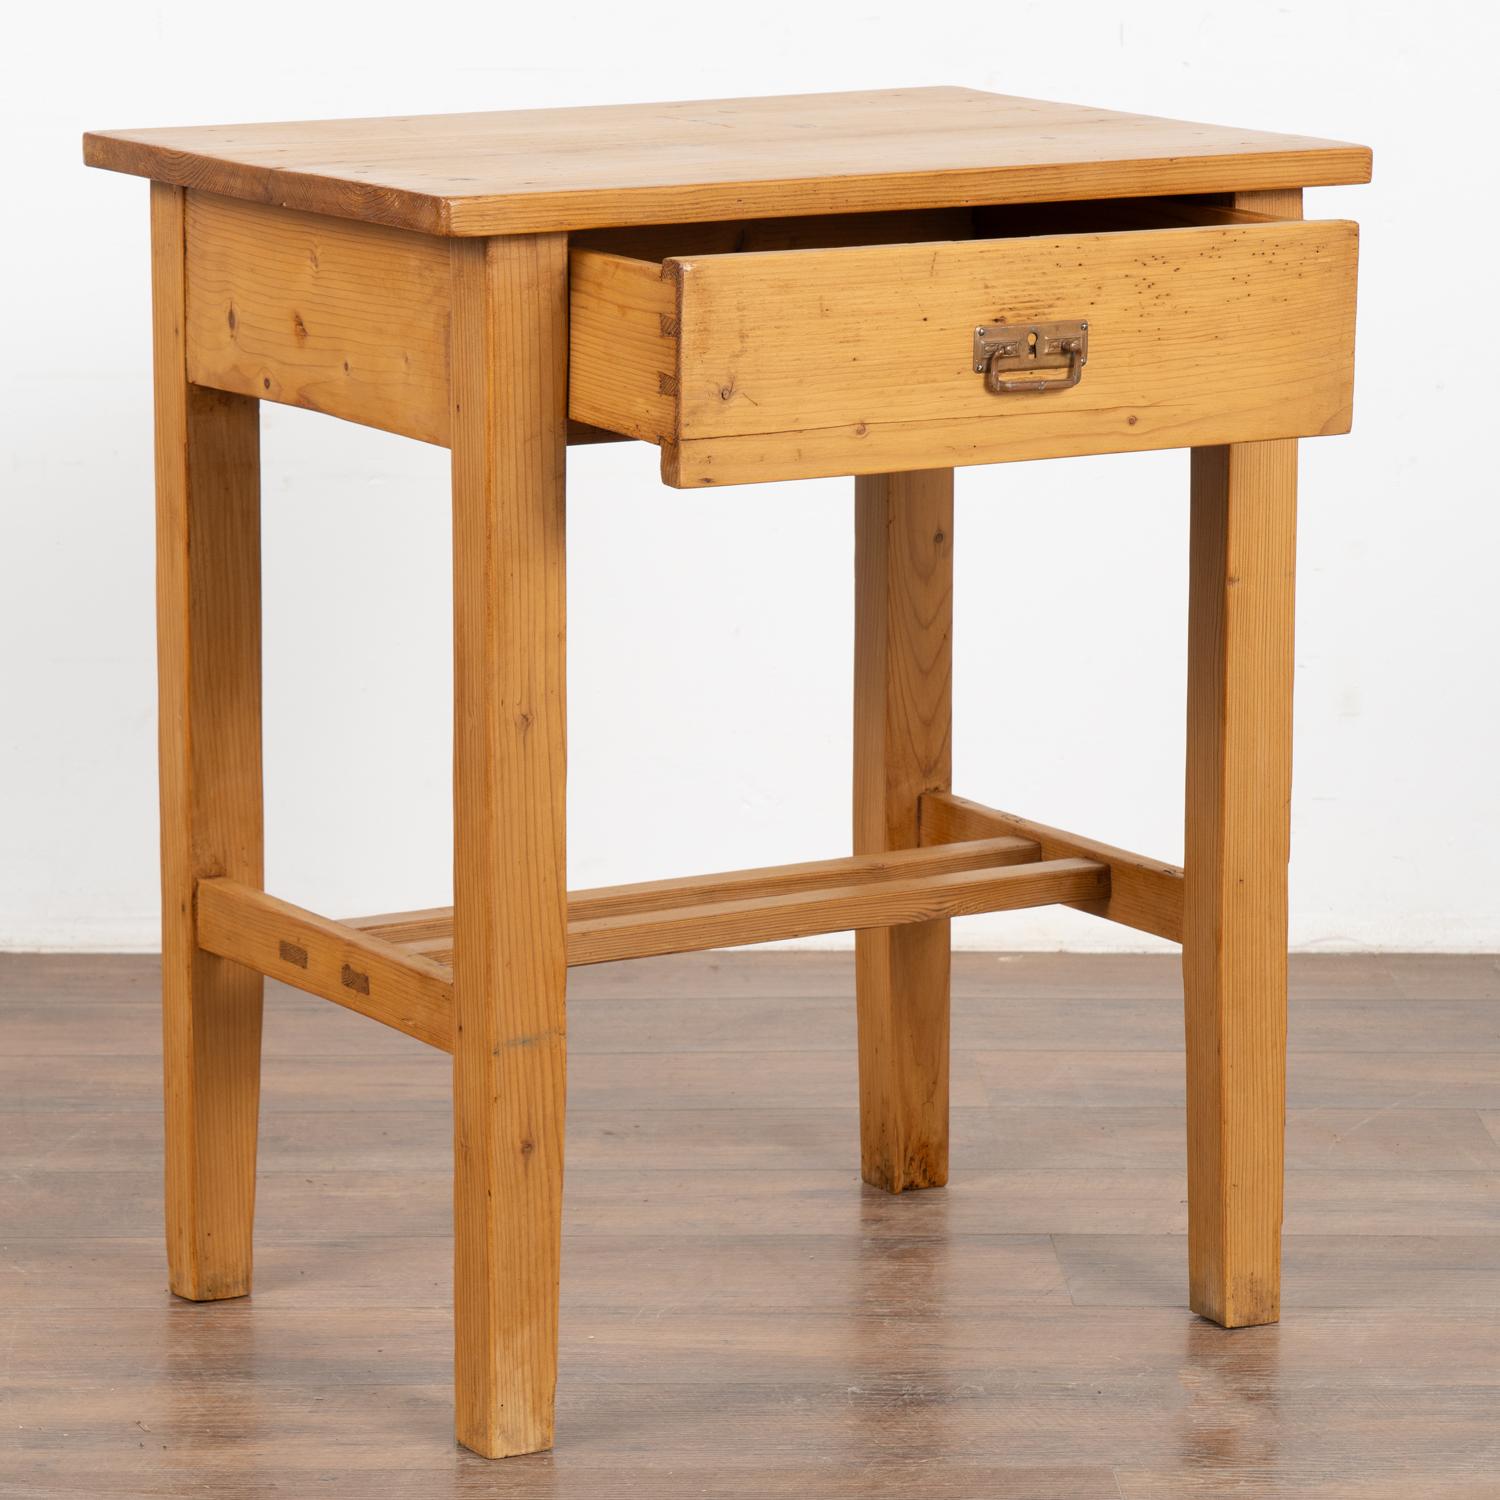 Country Small Pine Nightstand Side Table, Denmark circa 1900 For Sale